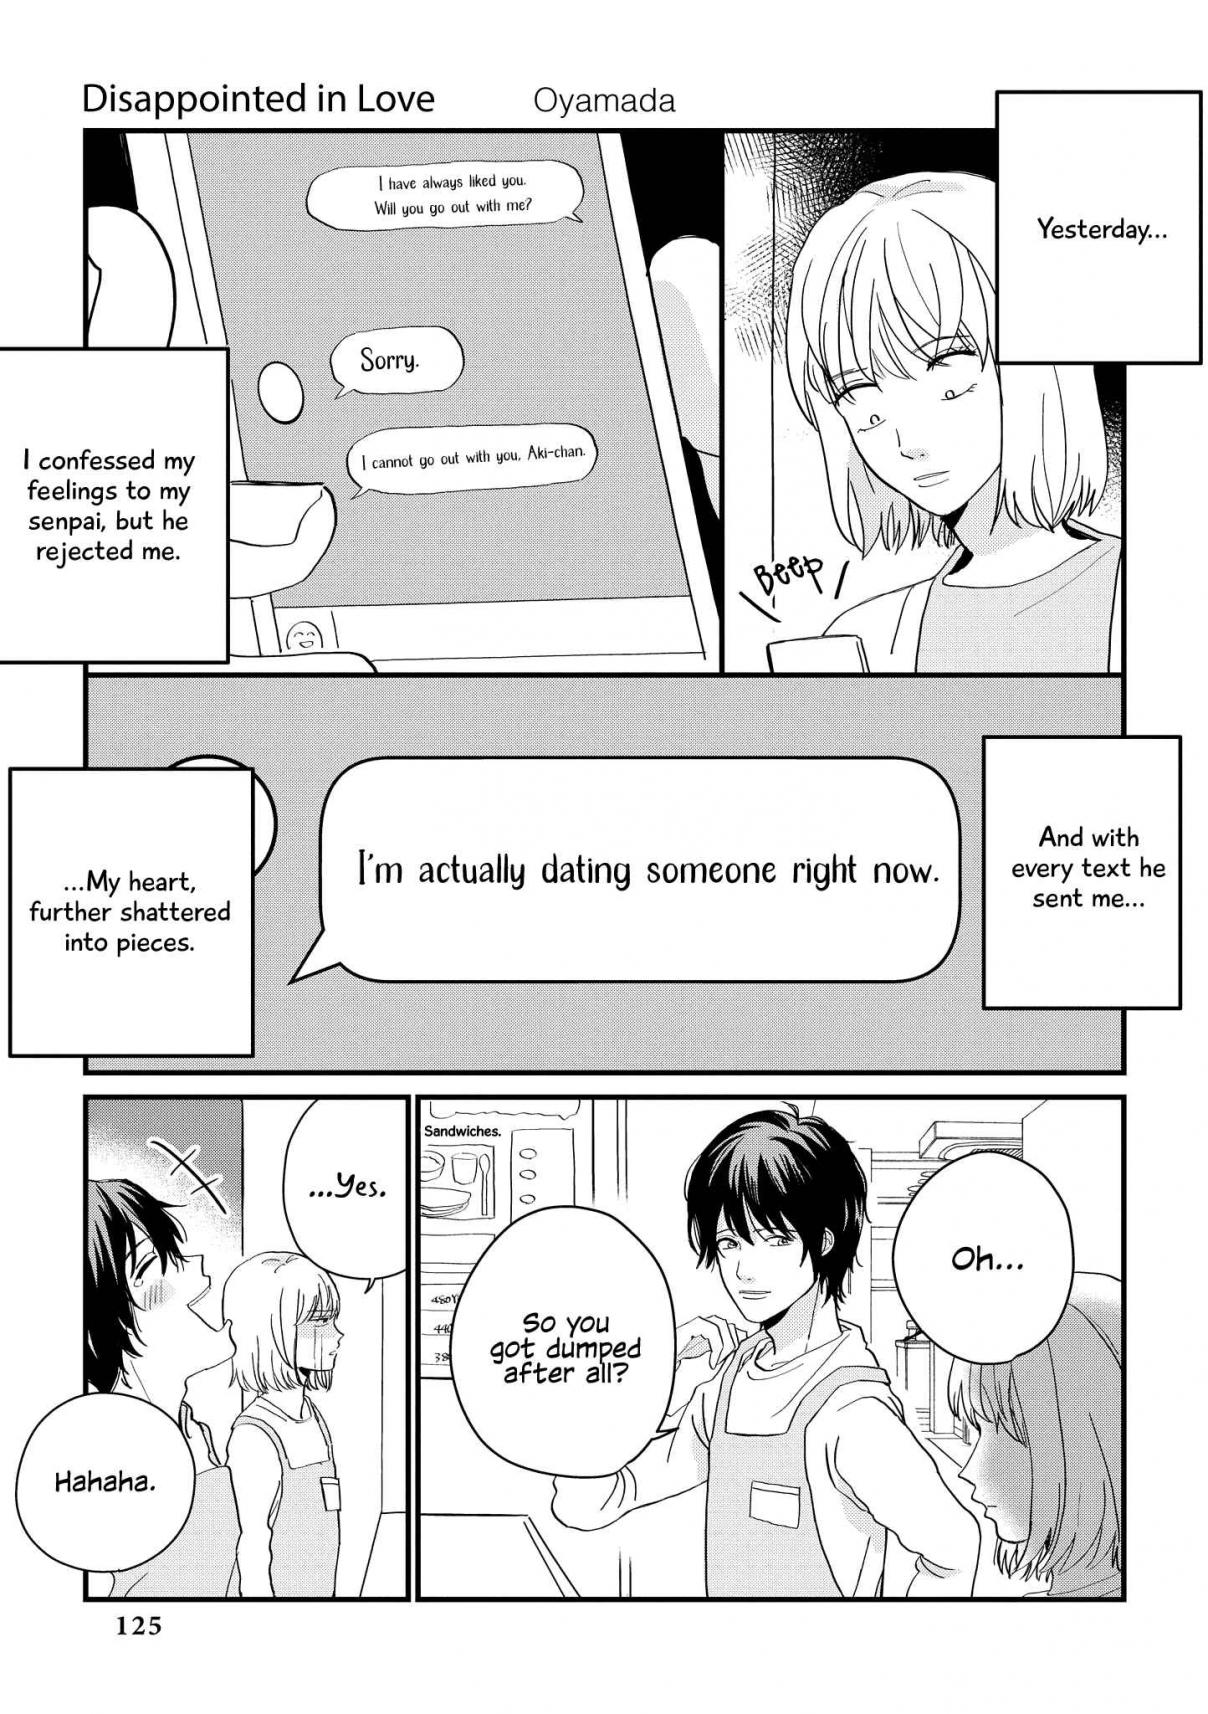 “It’s Too Precious and Hard to Read!!” 4P Short Stories Vol. 2 Ch. 47 Disappointed in love [by Oyamada]